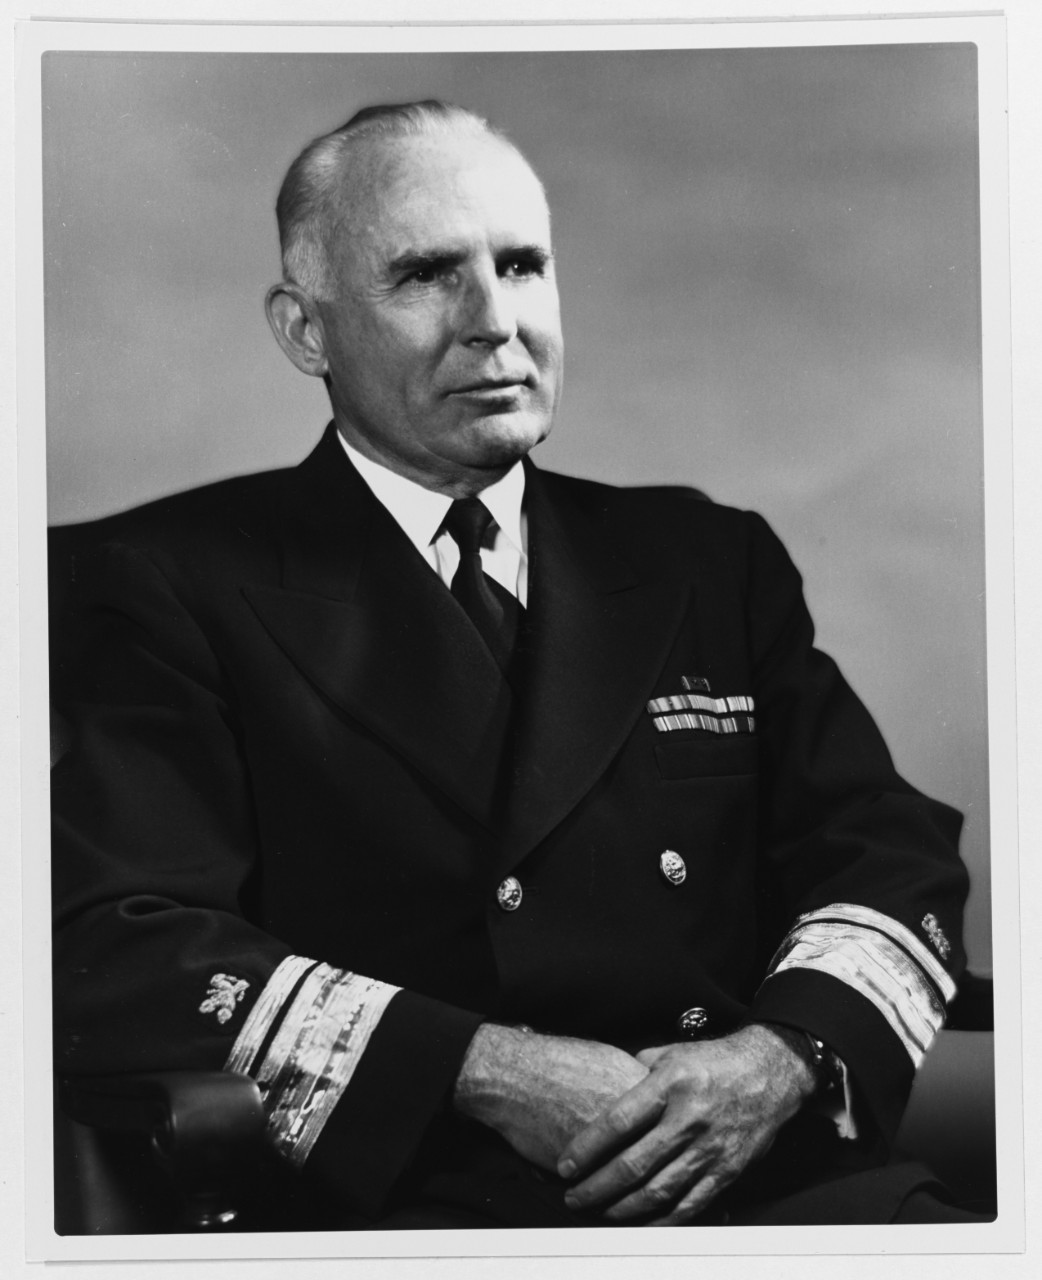 Rear Admiral C.G. Warfield, USNR (Supply Corps)